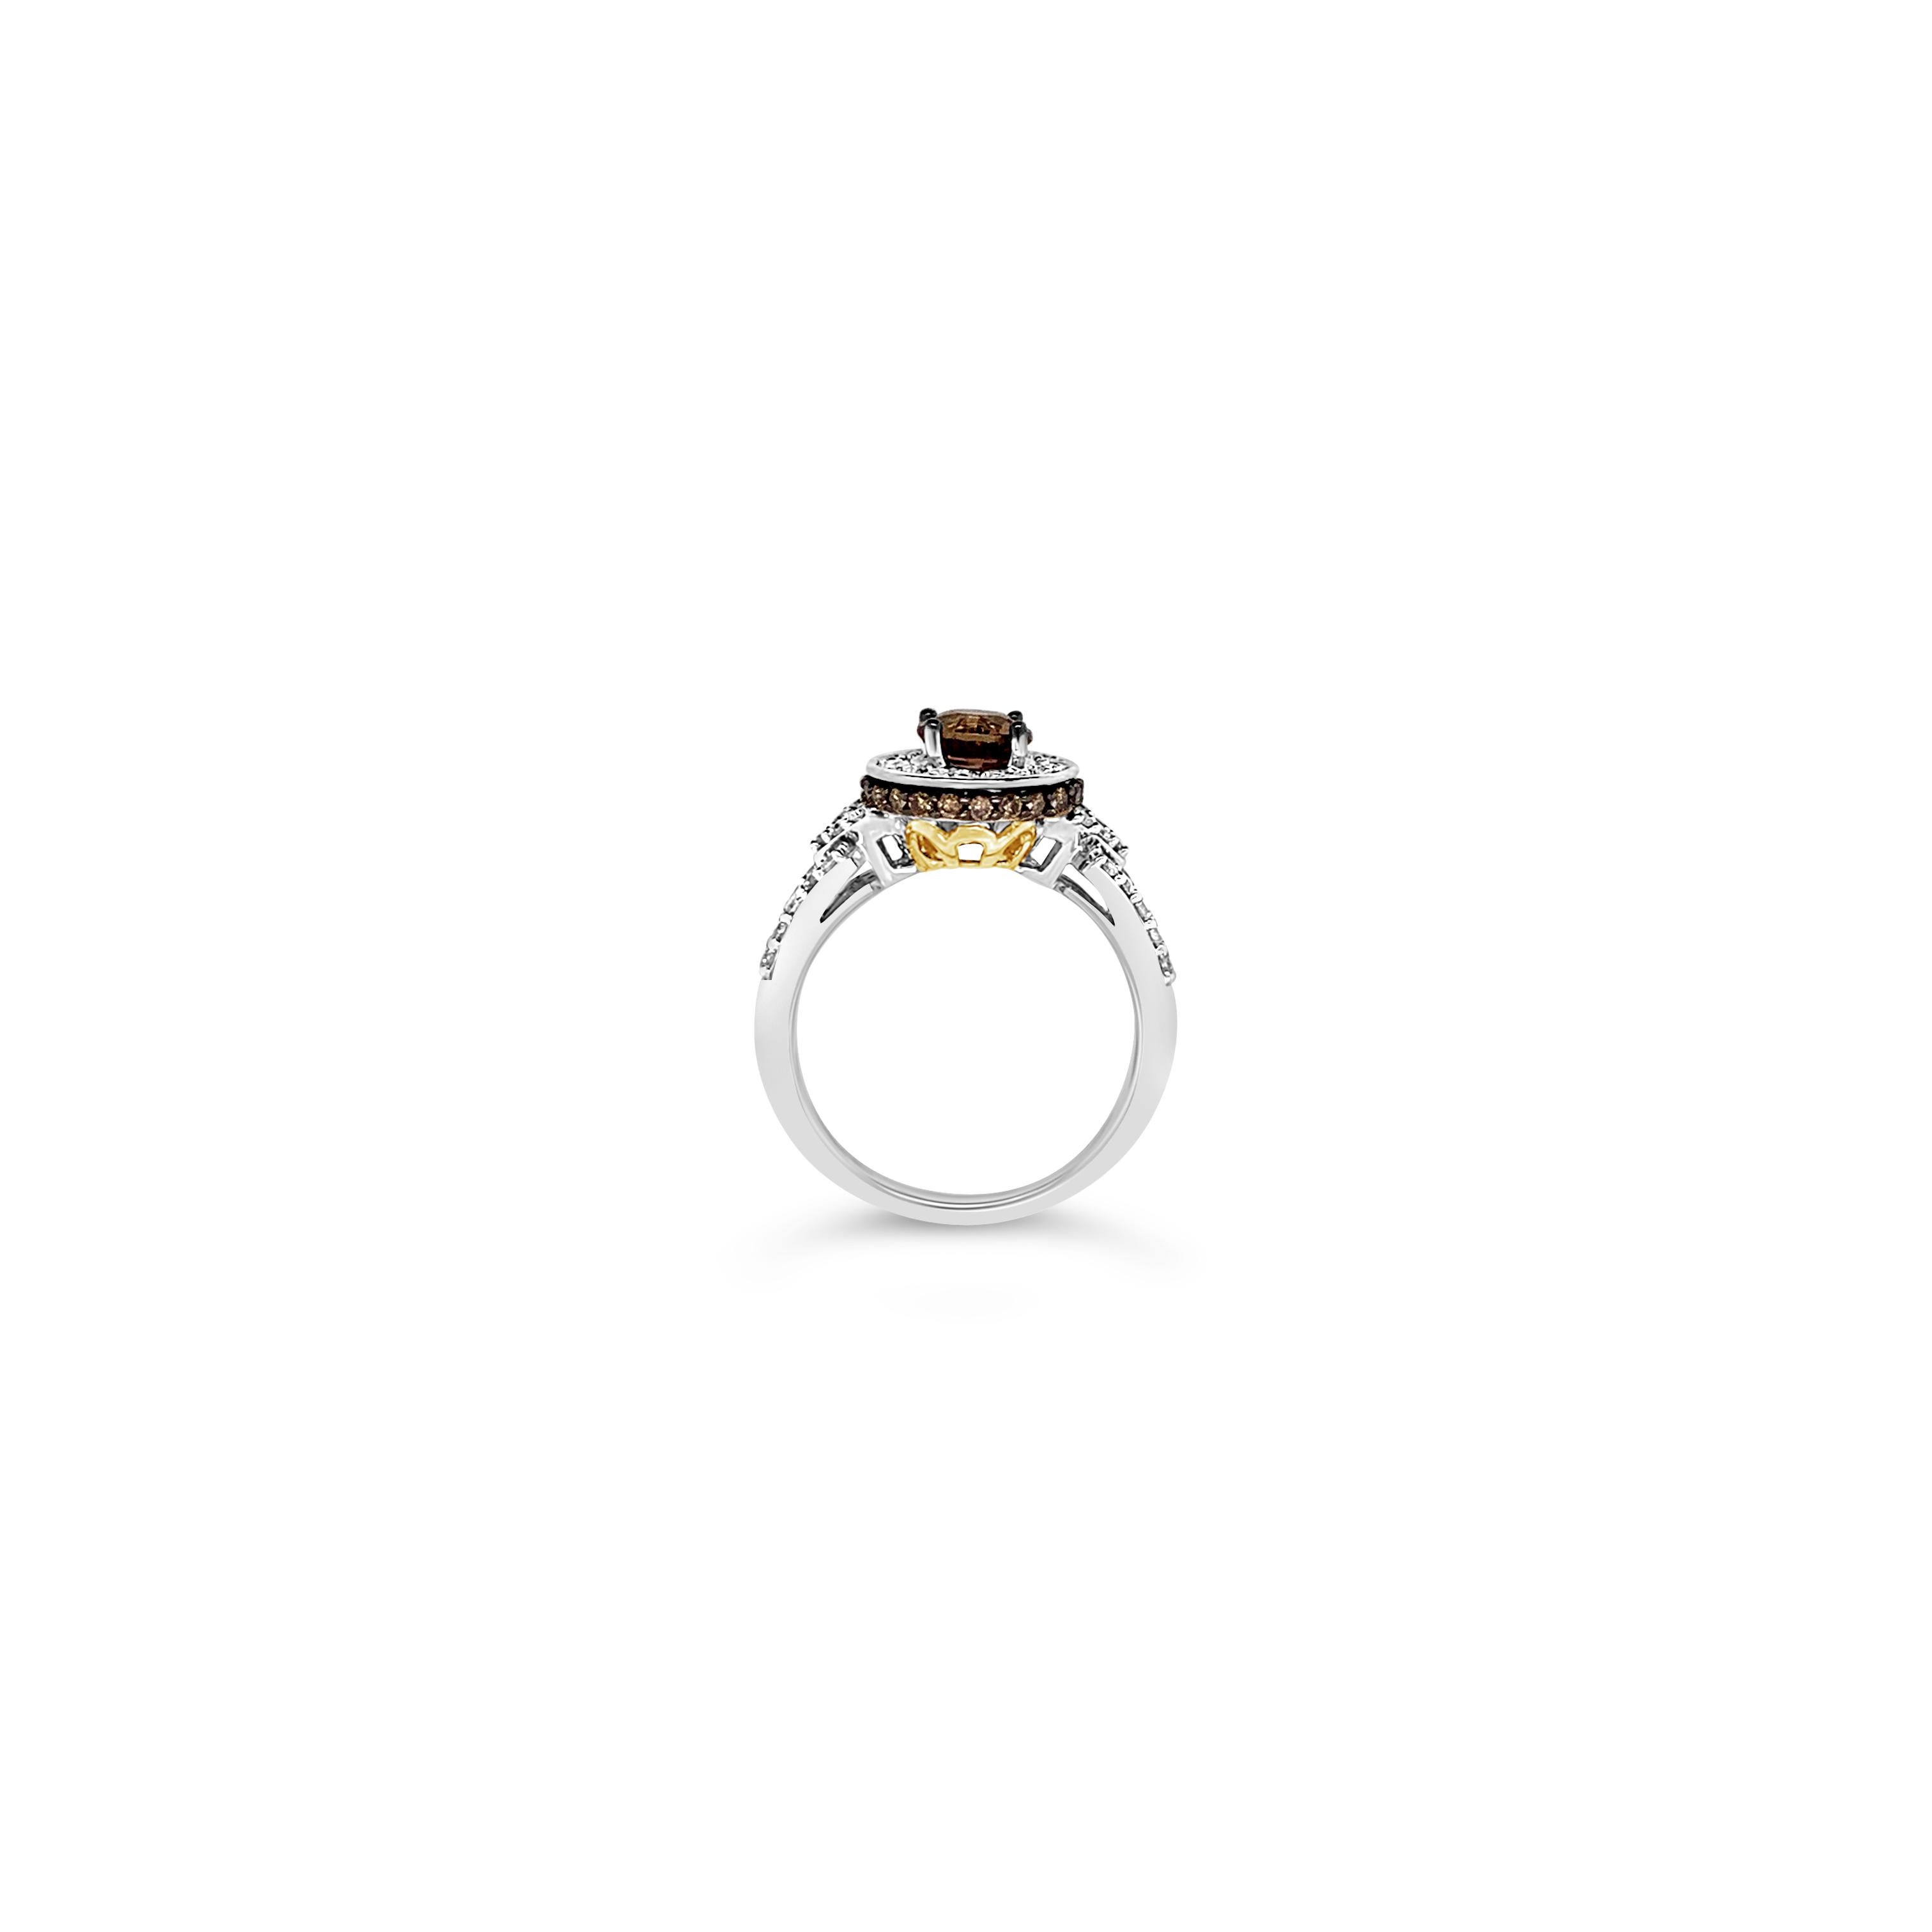 Le Vian Bridal® Ring featuring 0.98 cts. Fancy Sapphire, 0.47 cts. Vanilla Diamonds® , 0.21 cts. Chocolate Diamonds® set in 14K Two Tone Gold

Diamonds Breakdown:
.47 cts White Diamonds
.21 cts Brown Diamonds

Gems Breakdown:
.98 cts Fancy